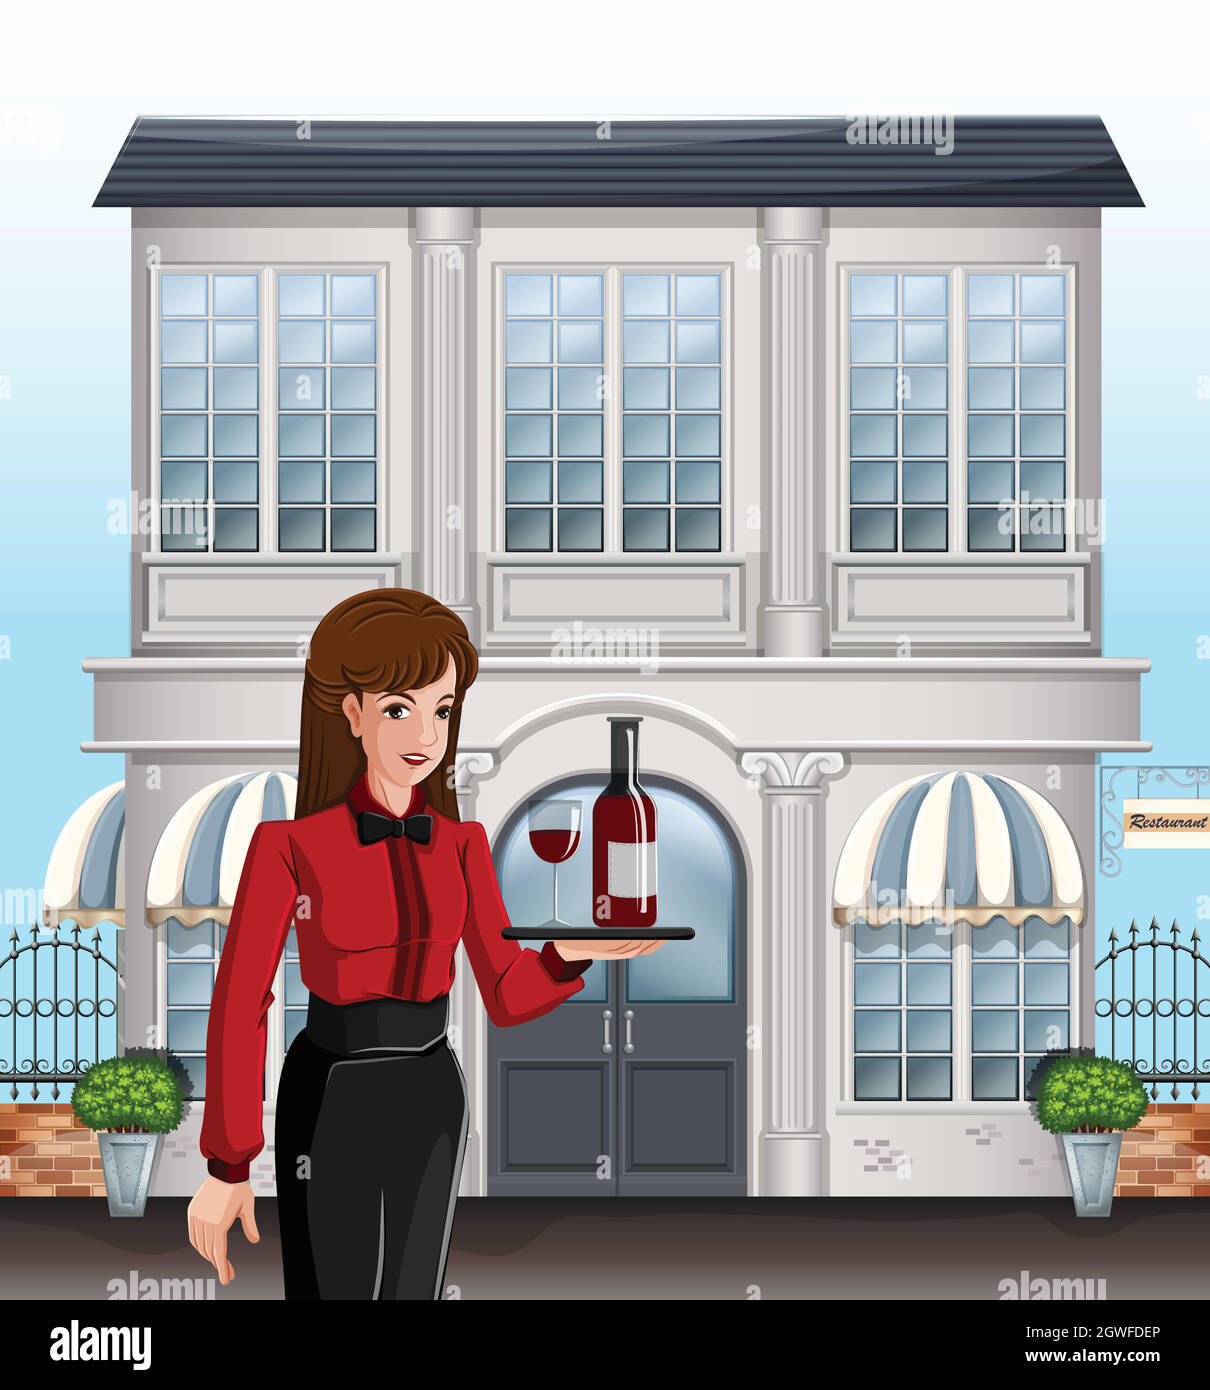 A female server in front of a building Stock Vector